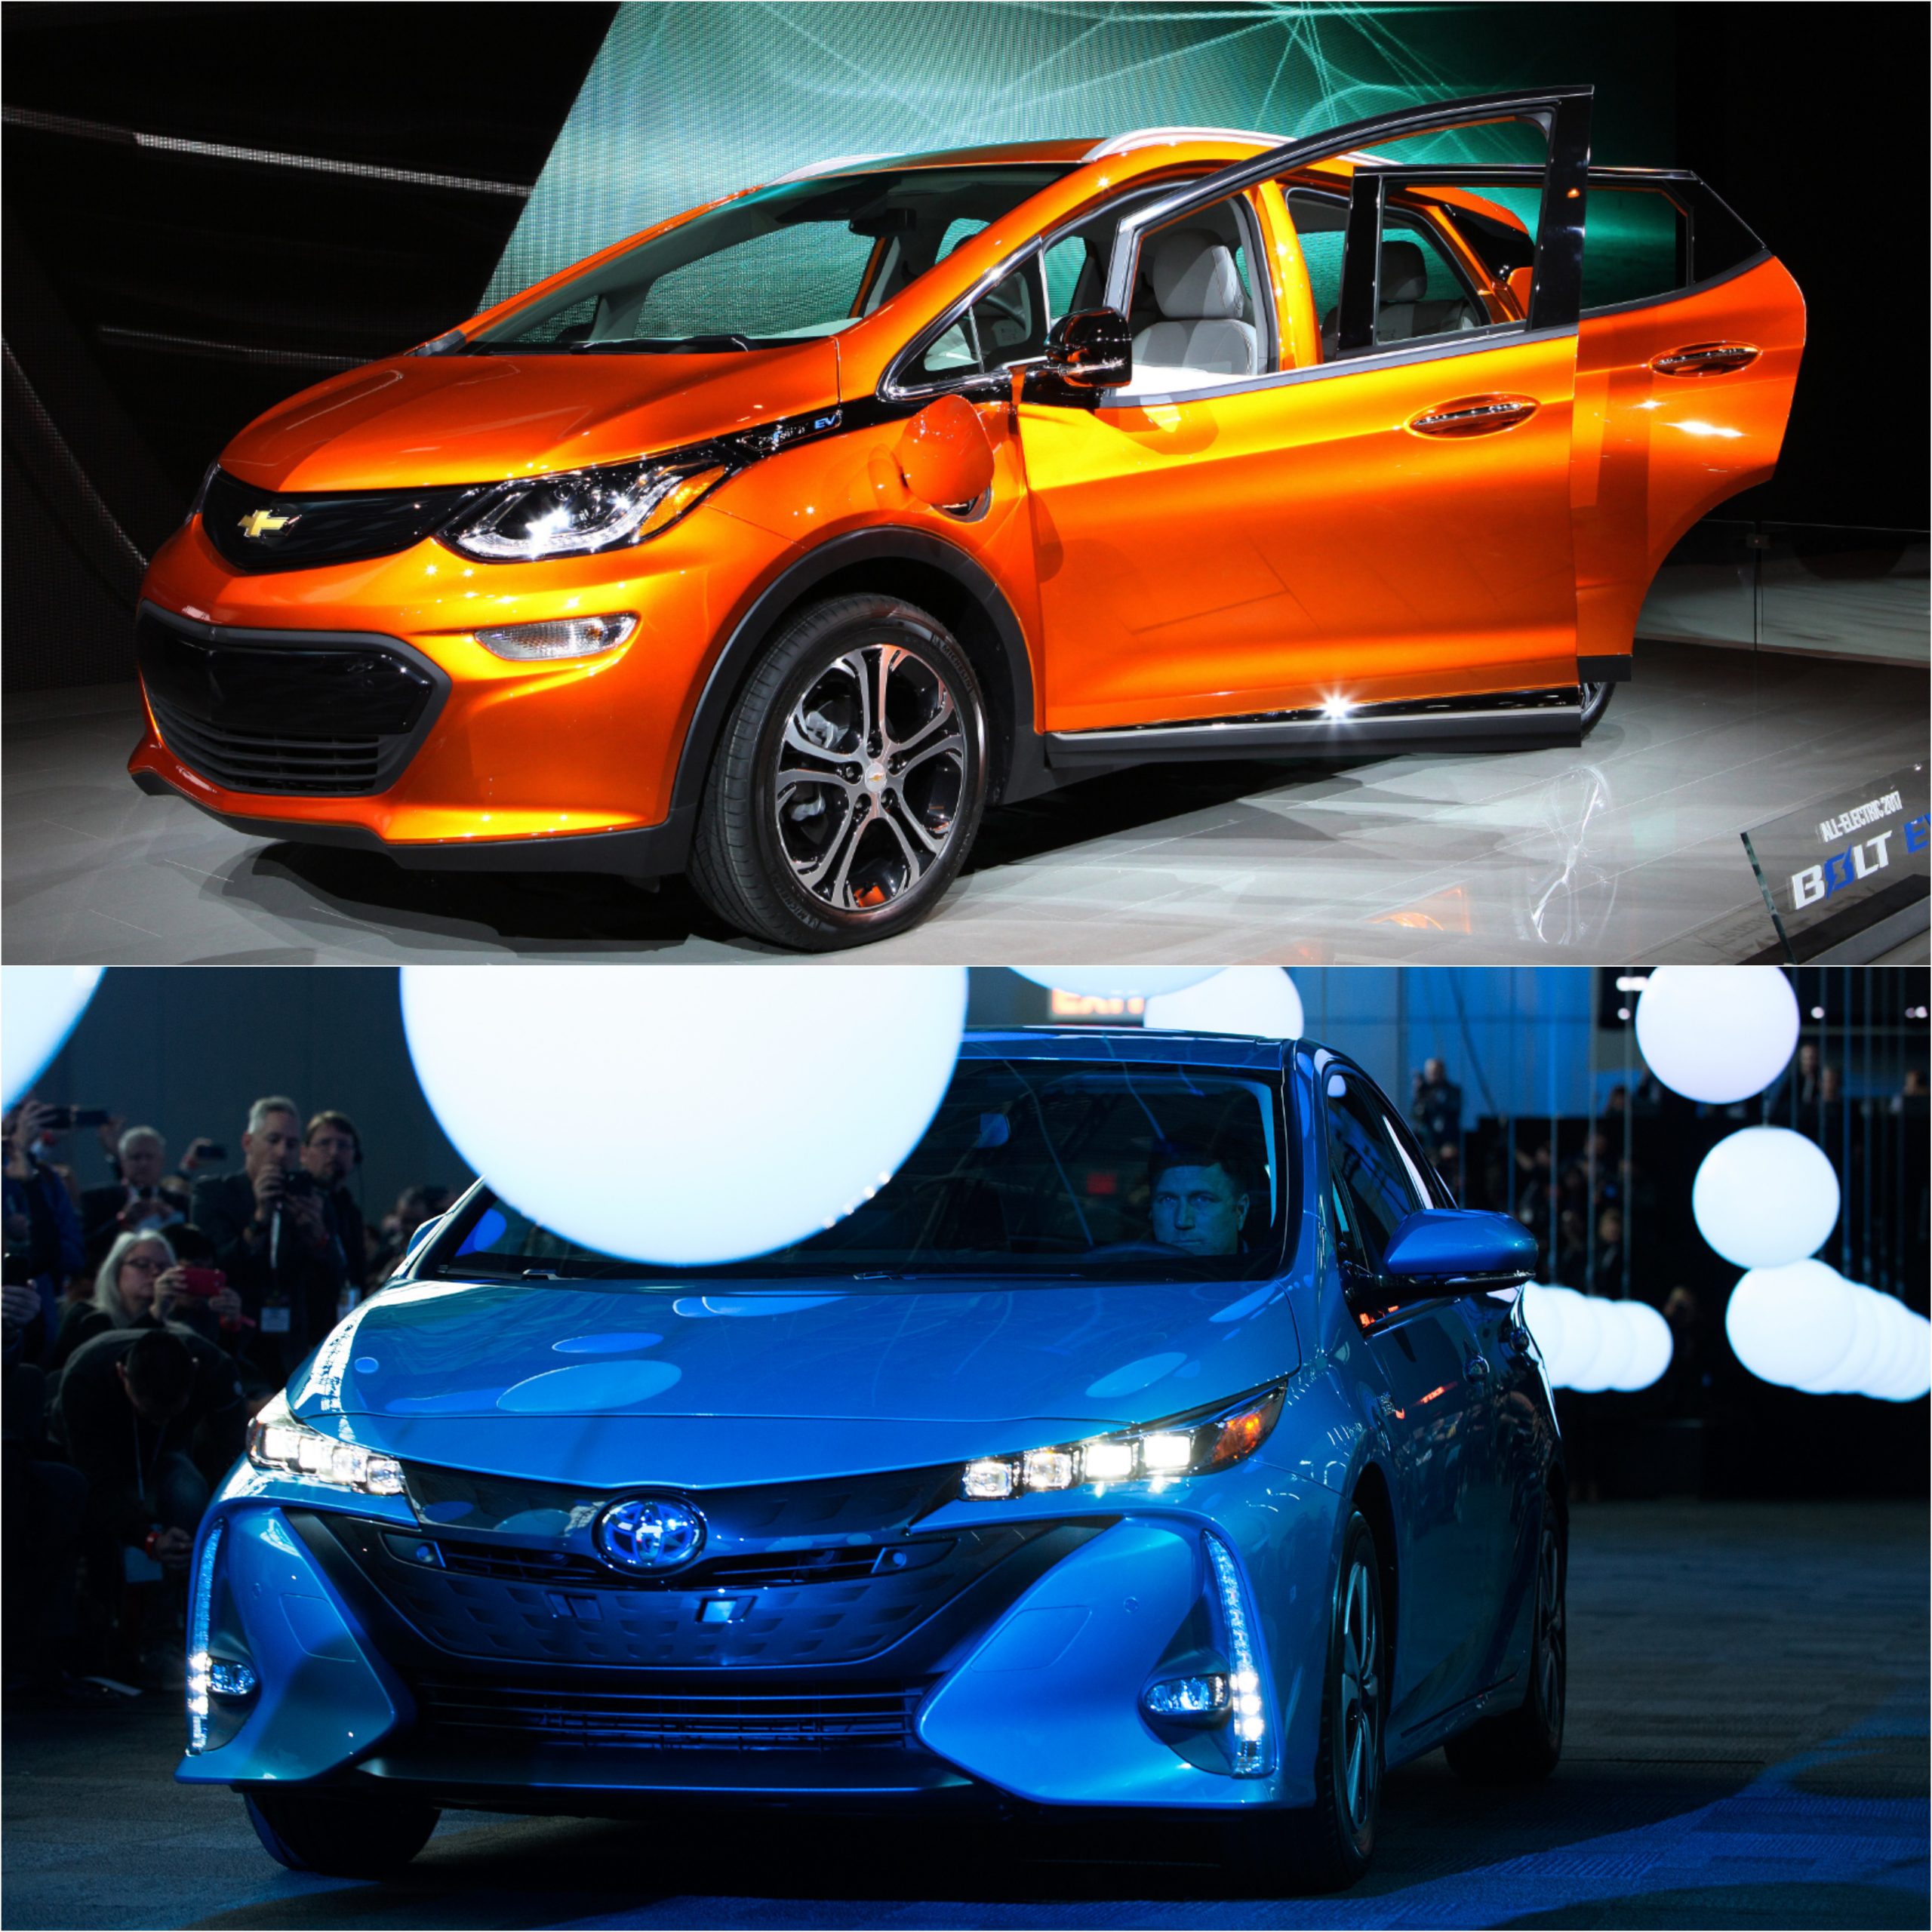 A top to bottom comparison of an orange 2021 Chevy Bolt and a blue 2021 Prius Prime